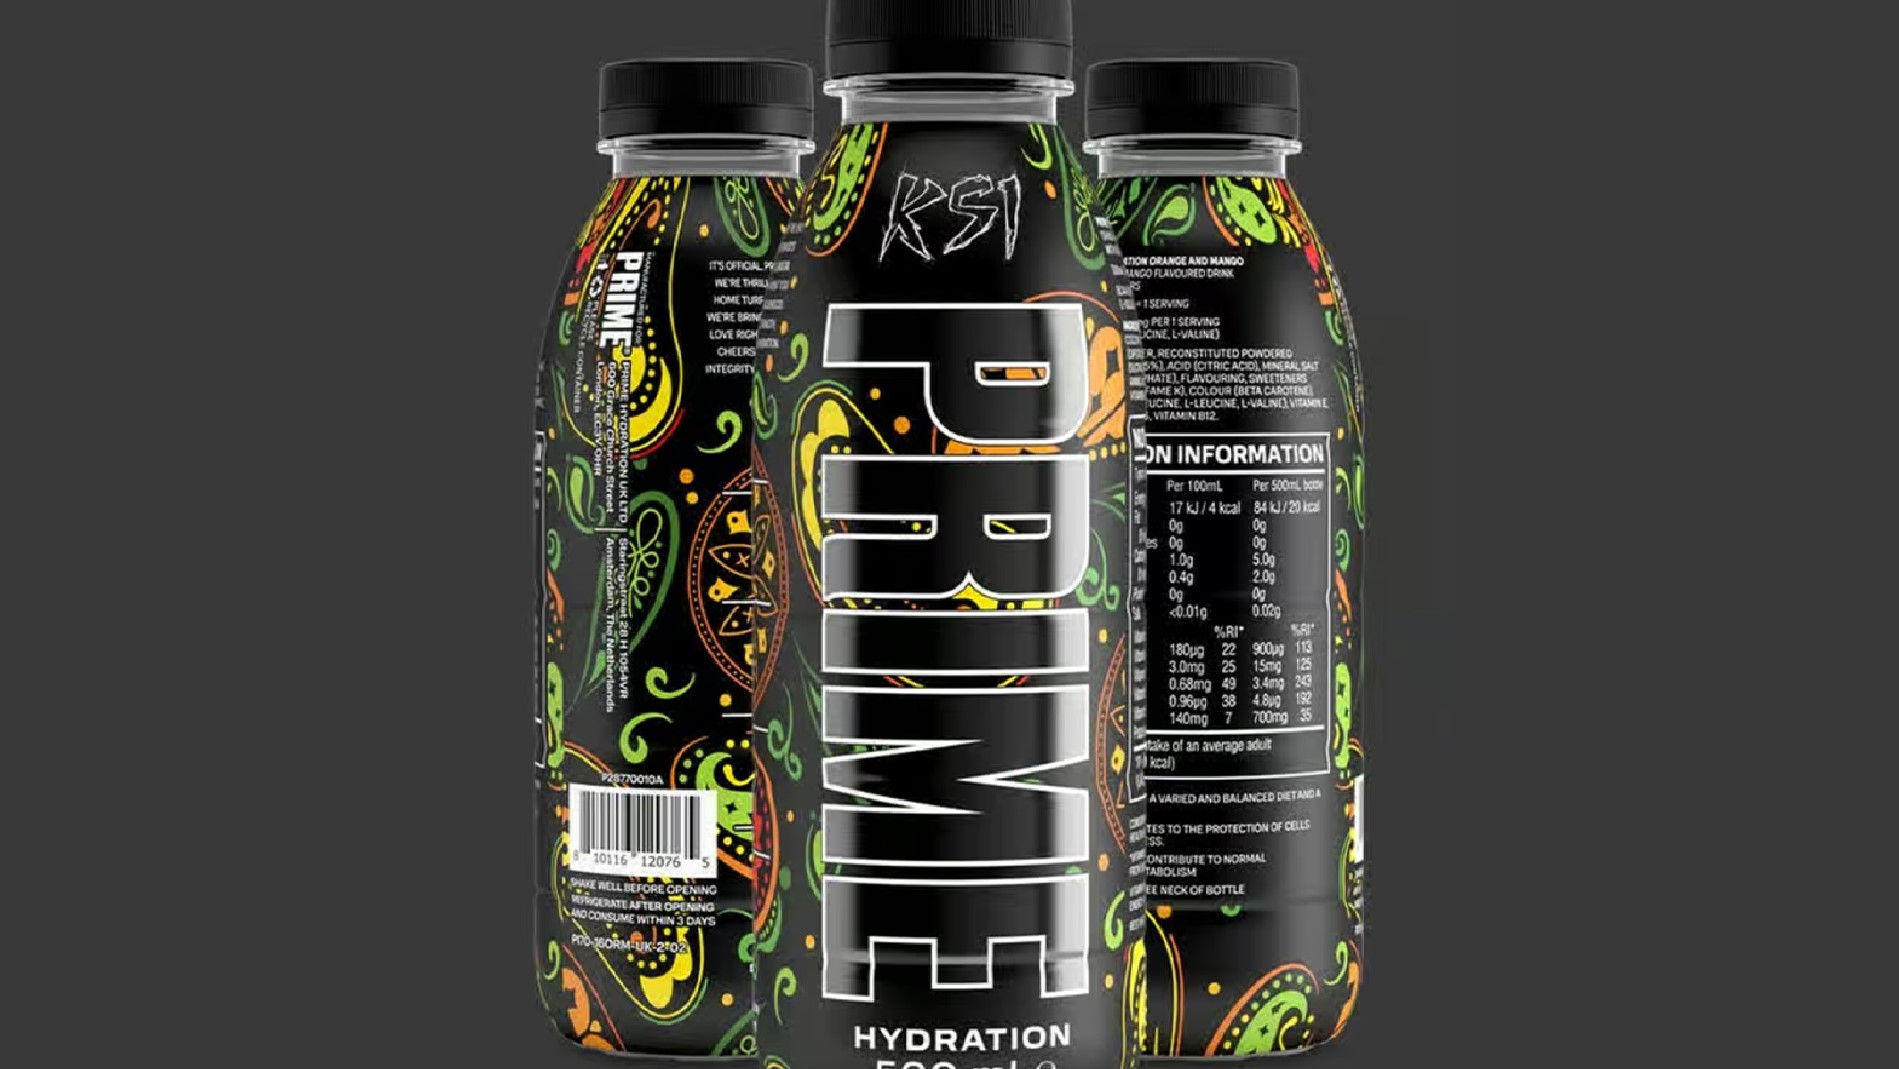 KSI reveals limited edition Prime Hydration flavor exclusive to the UK